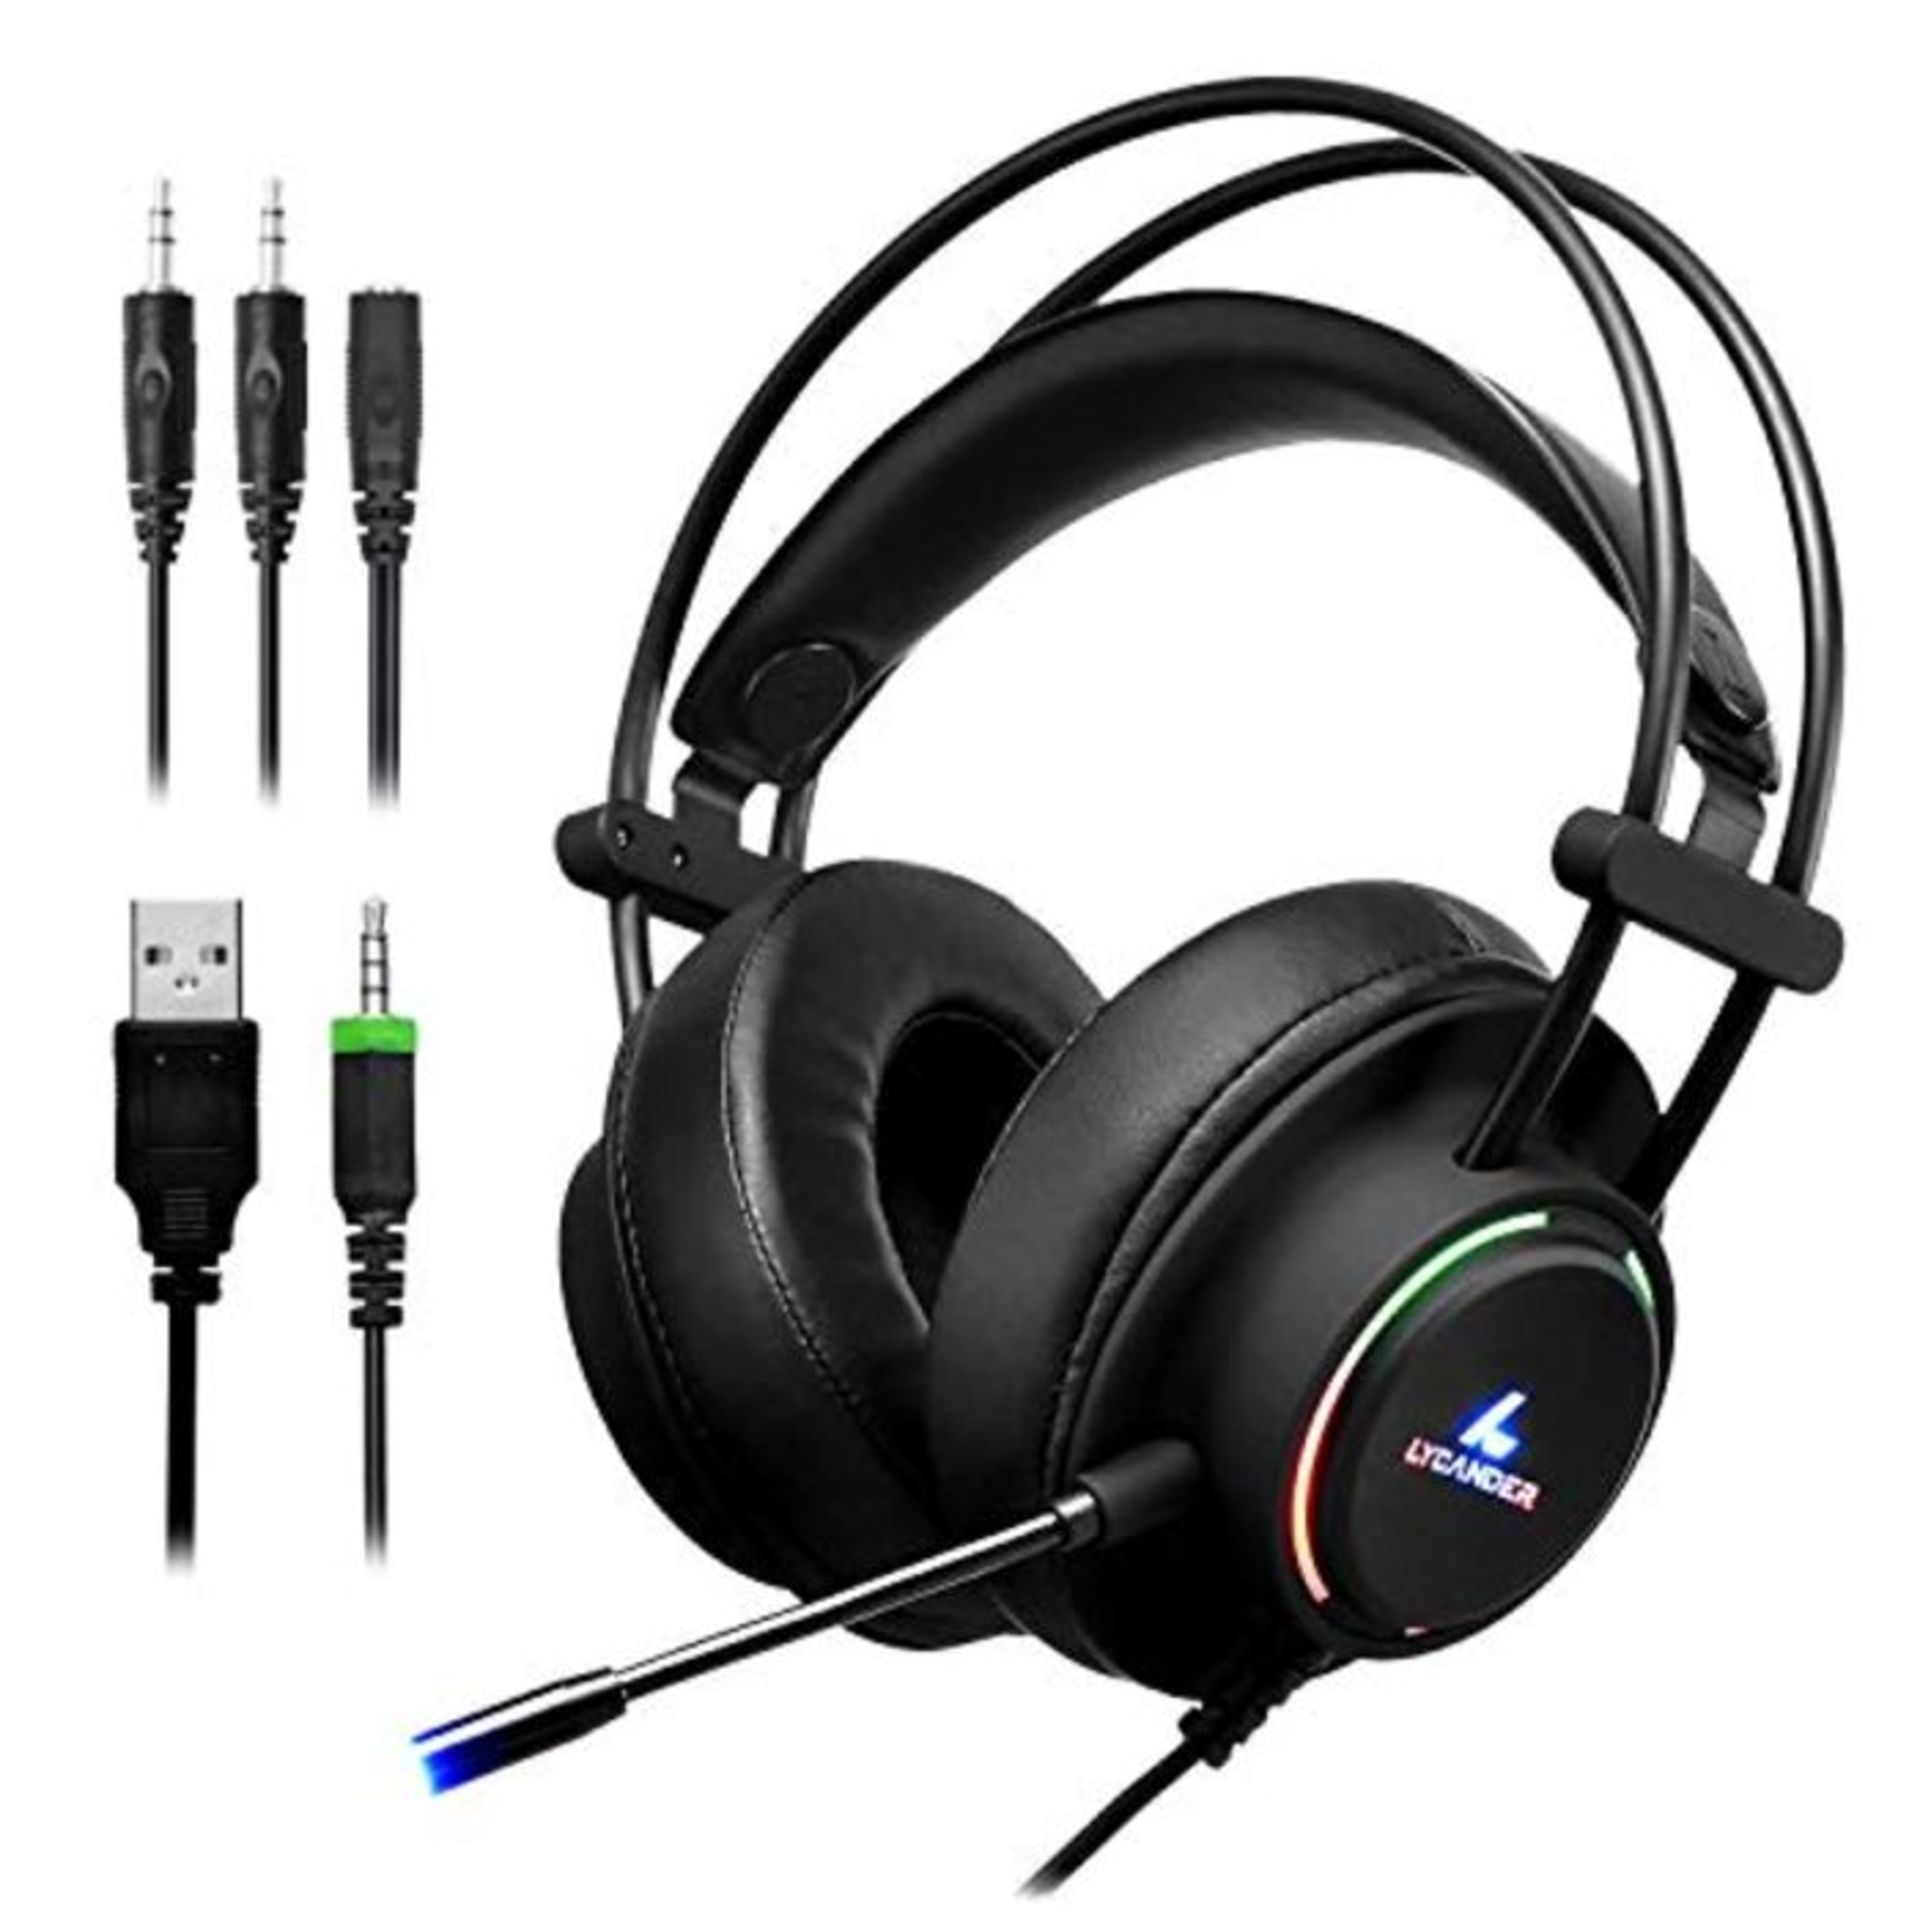 LYCANDER Gaming Headset with Microphone LED Light, 3.5mm input - for PC, PS4, Xbox One